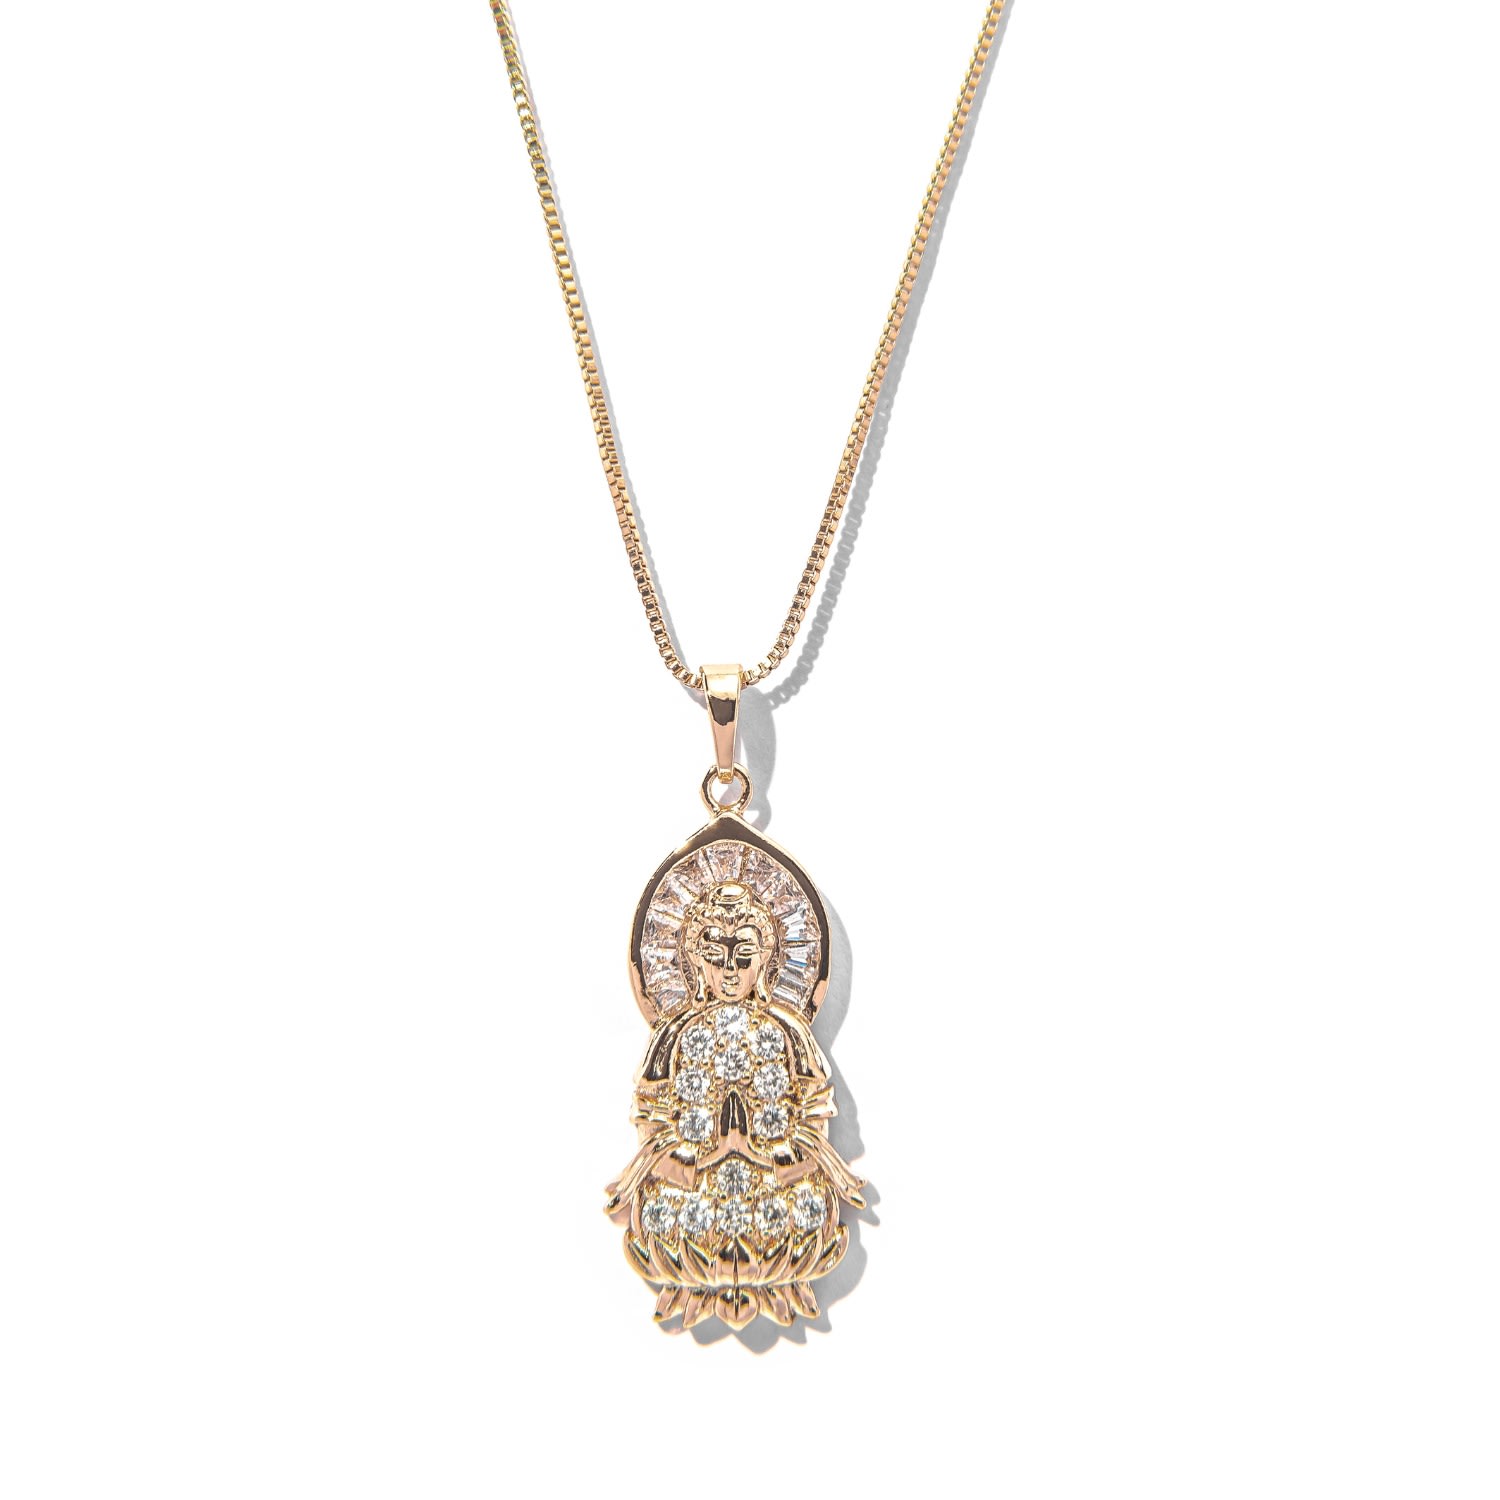 Women's Gold Guan Yin Buddha Pendant Necklace The Essential Jewels